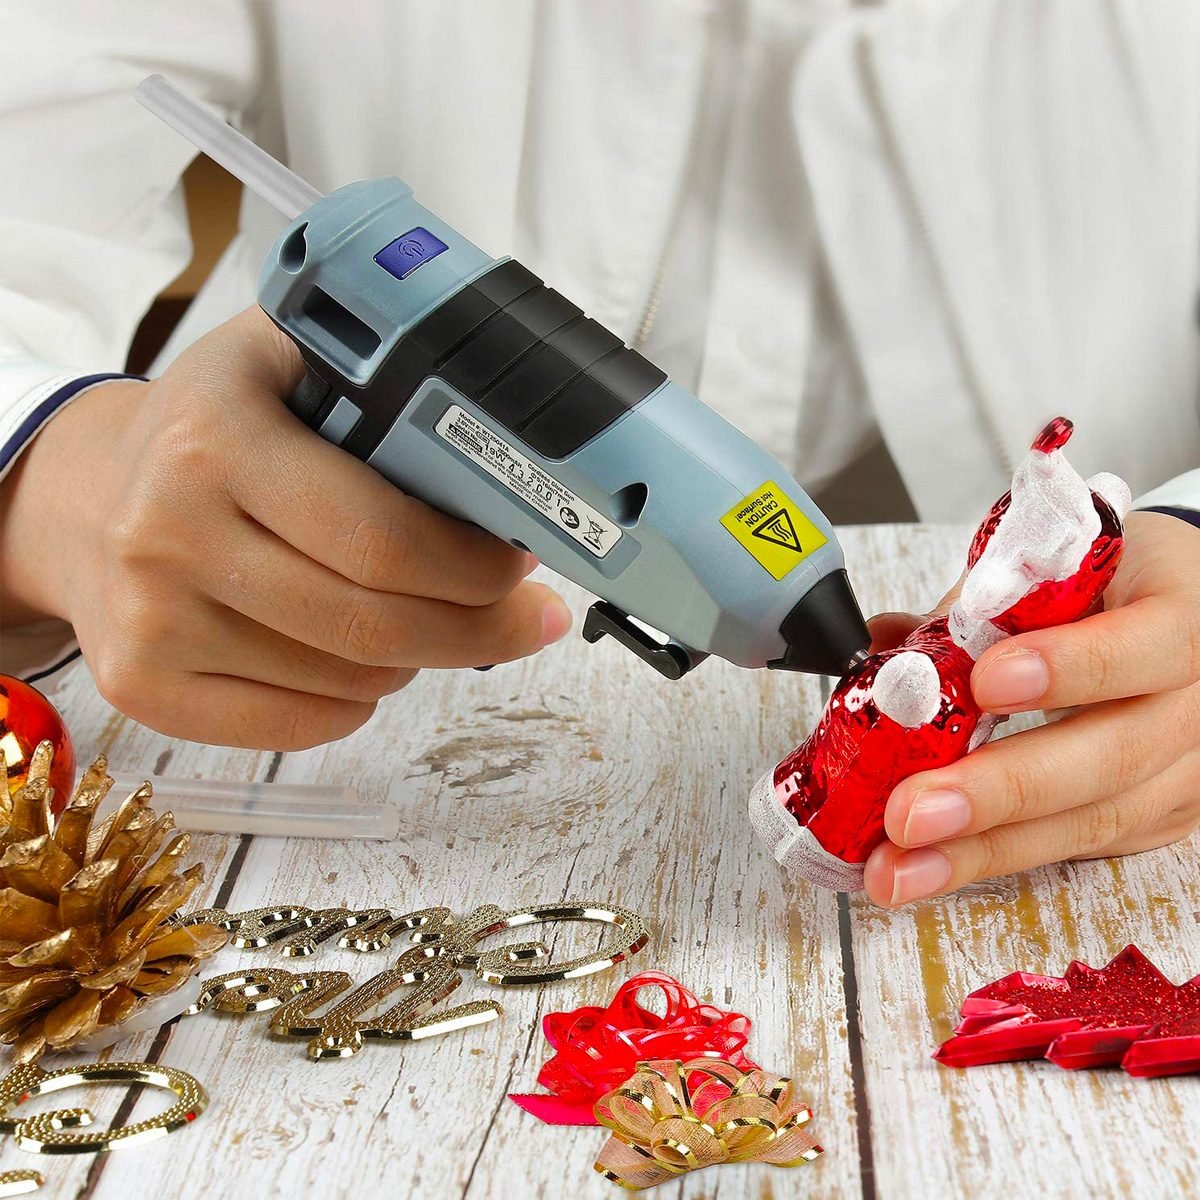 Top 10: Best Cordless Hot Glue Guns of 2023 / Lithium Glue Gun Tools for  DIY Projects, Arts, Crafts 